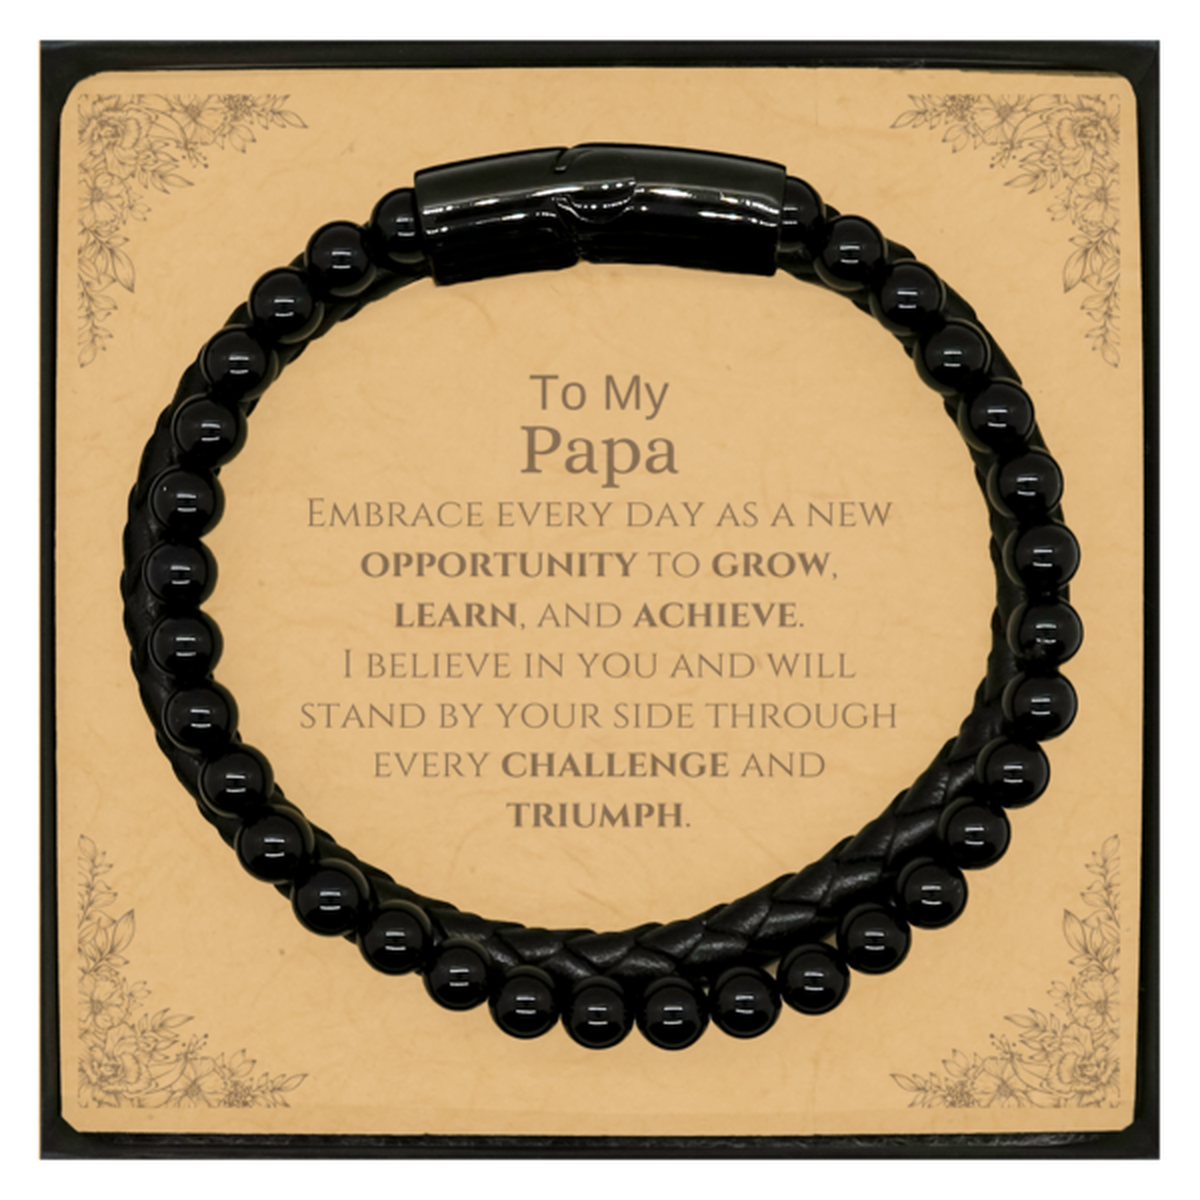 To My Papa Gifts, I believe in you and will stand by your side, Inspirational Stone Leather Bracelets For Papa, Birthday Christmas Motivational Papa Gifts